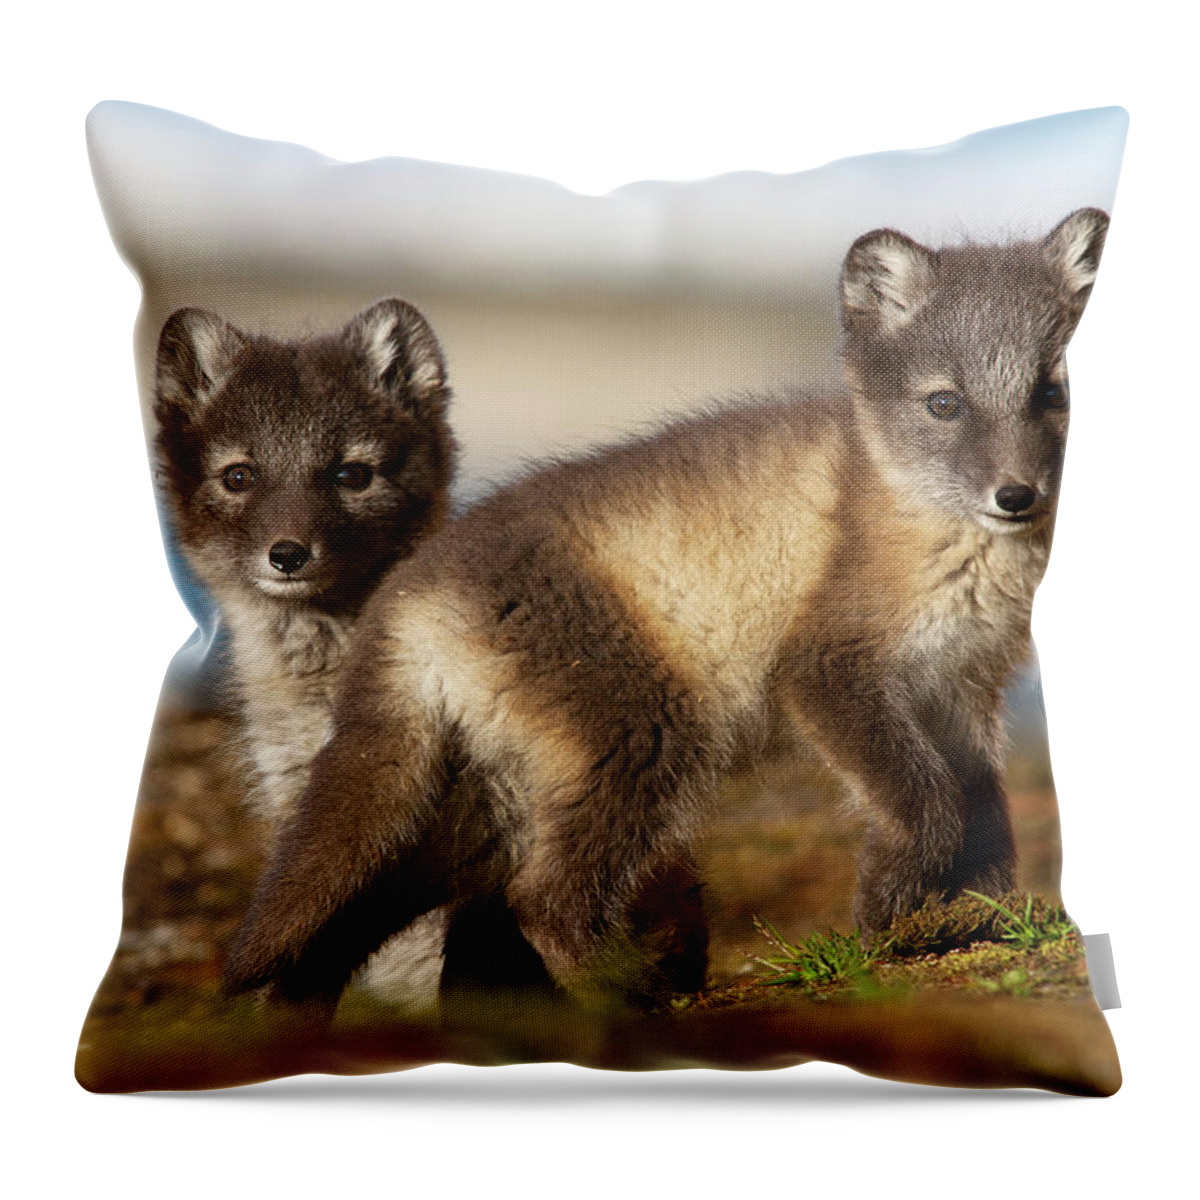 Mp Throw Pillow featuring the photograph Arctic Fox Kits by Jasper Doest